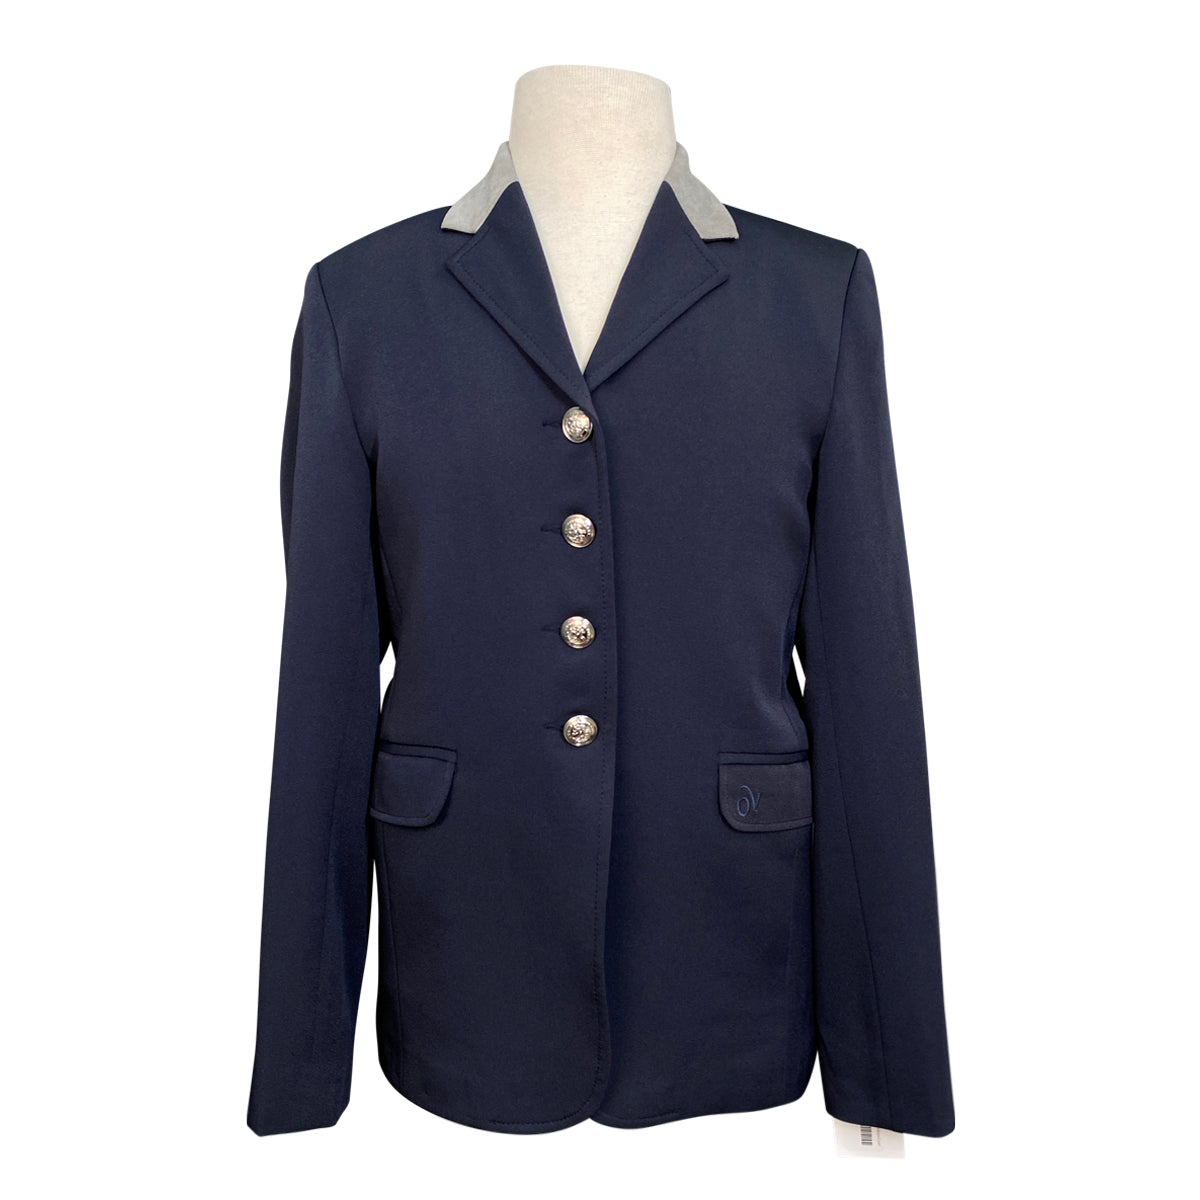 Ovation Performance Competition Coat in Navy/Slate